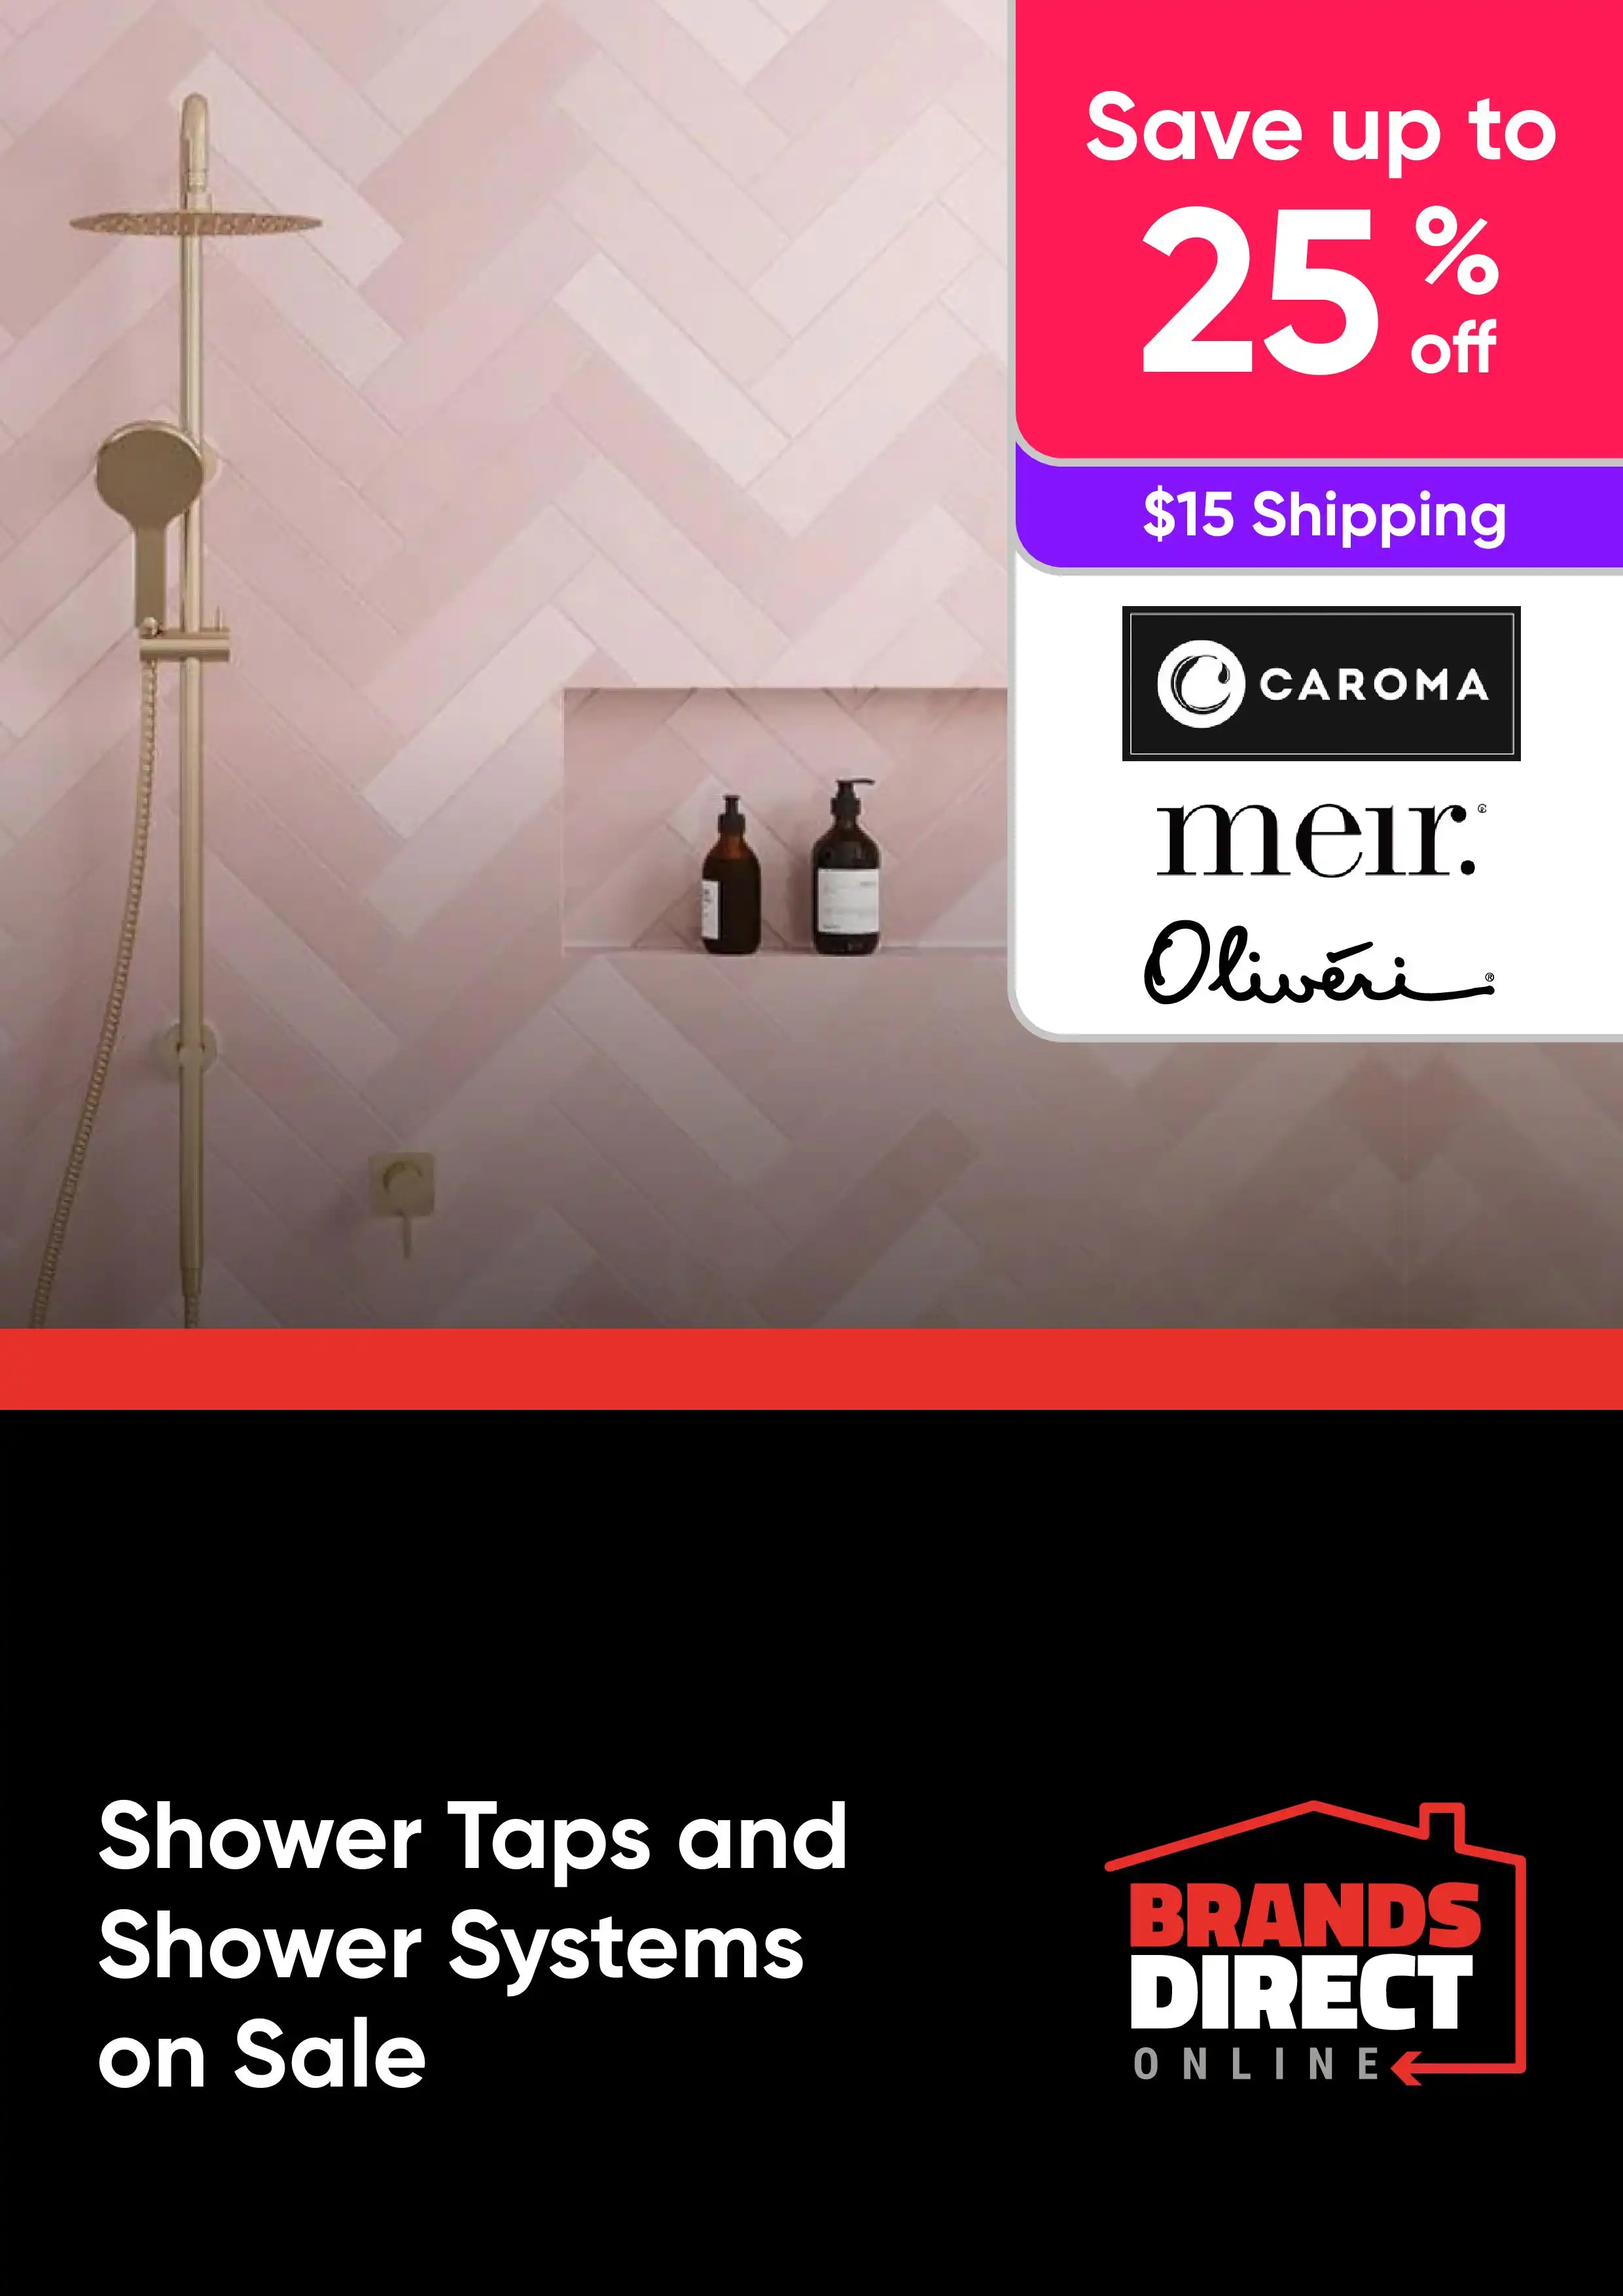 Shower Taps and Shower Systems on Sale now - Save Up to 25% Off